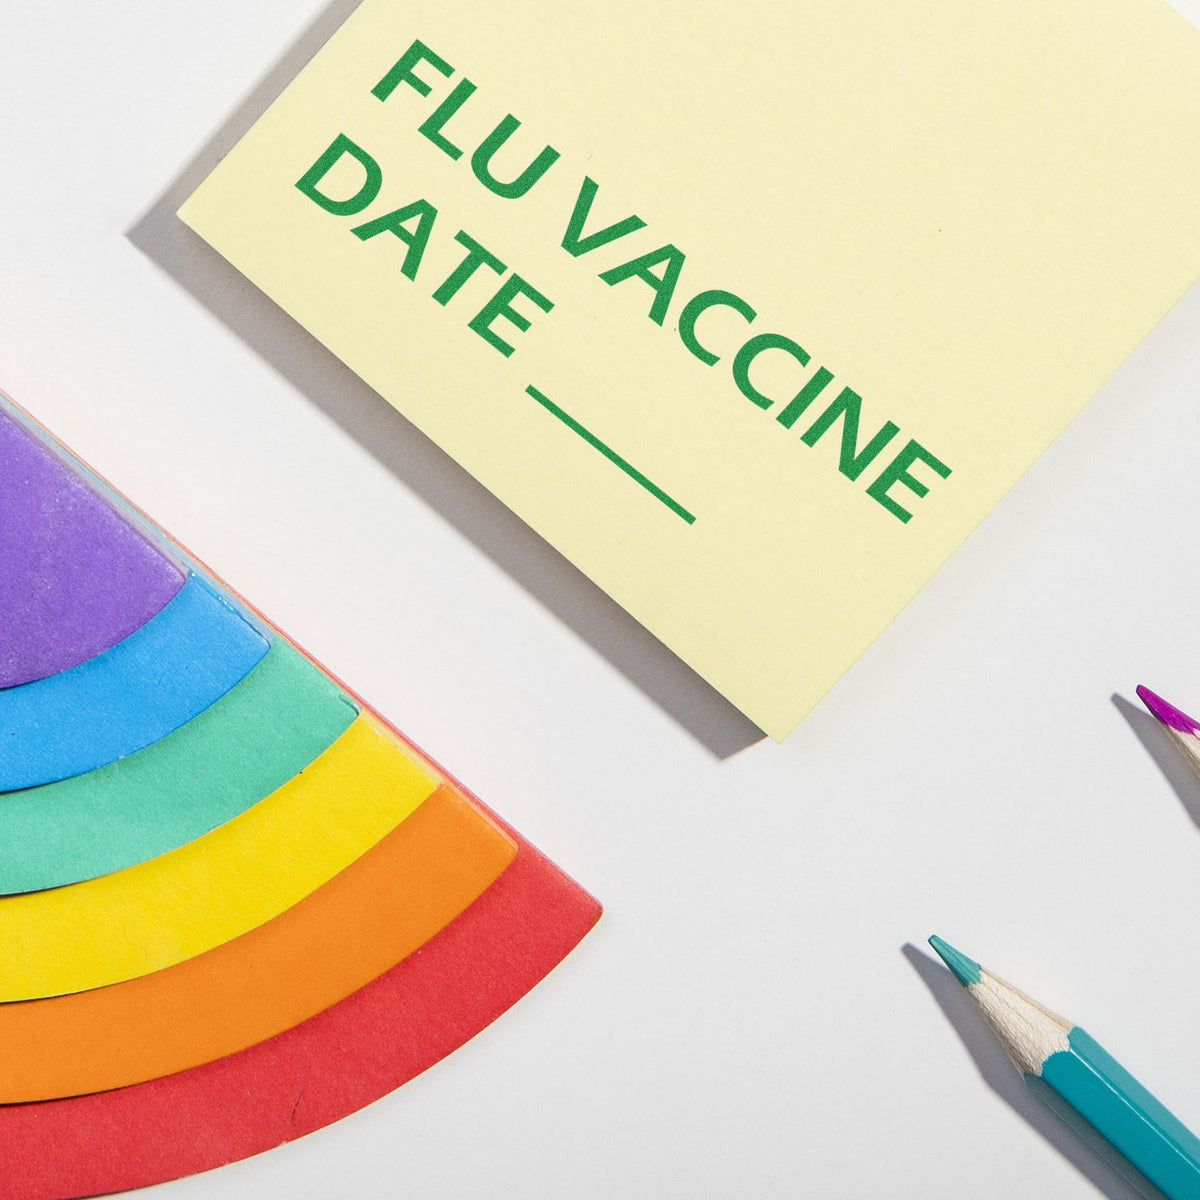 Large Flu Vaccine Date Rubber Stamp In Use